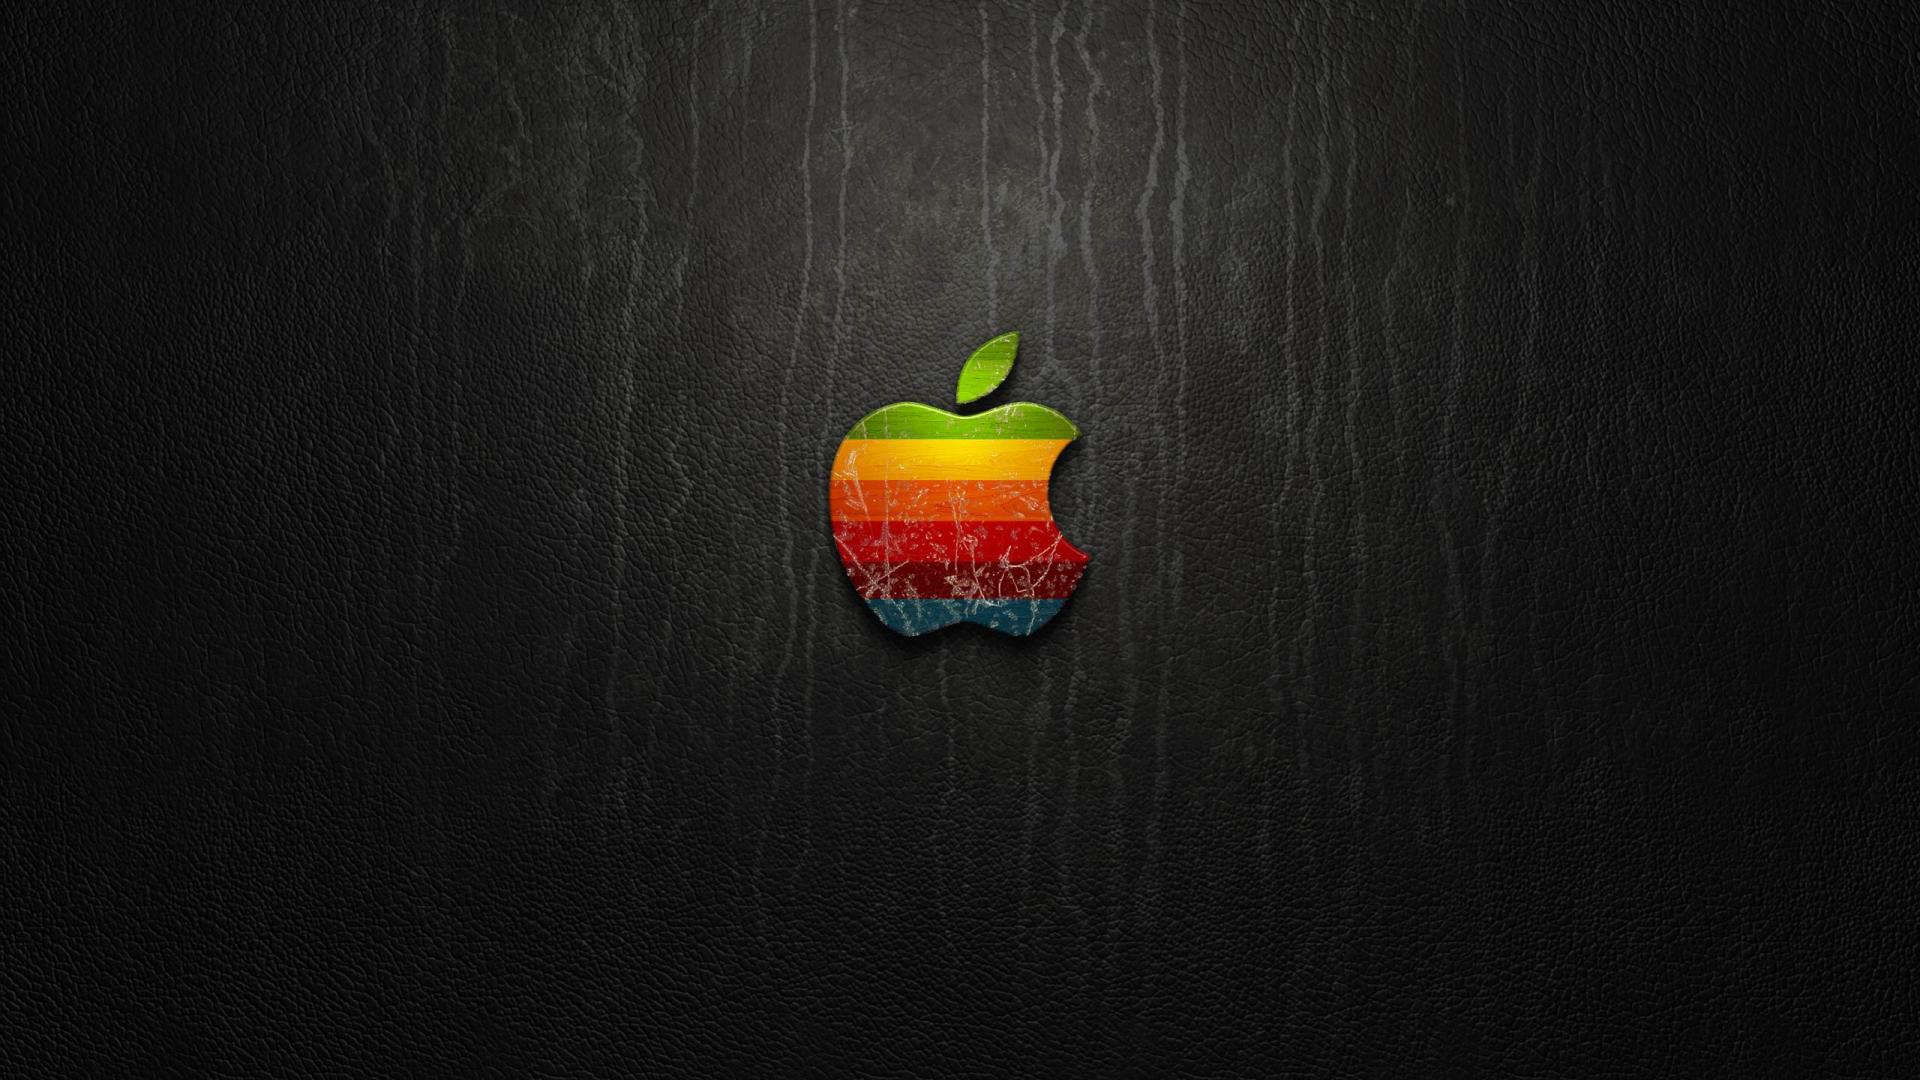 Download Apple For Pc Wallpaper. Full HD Background